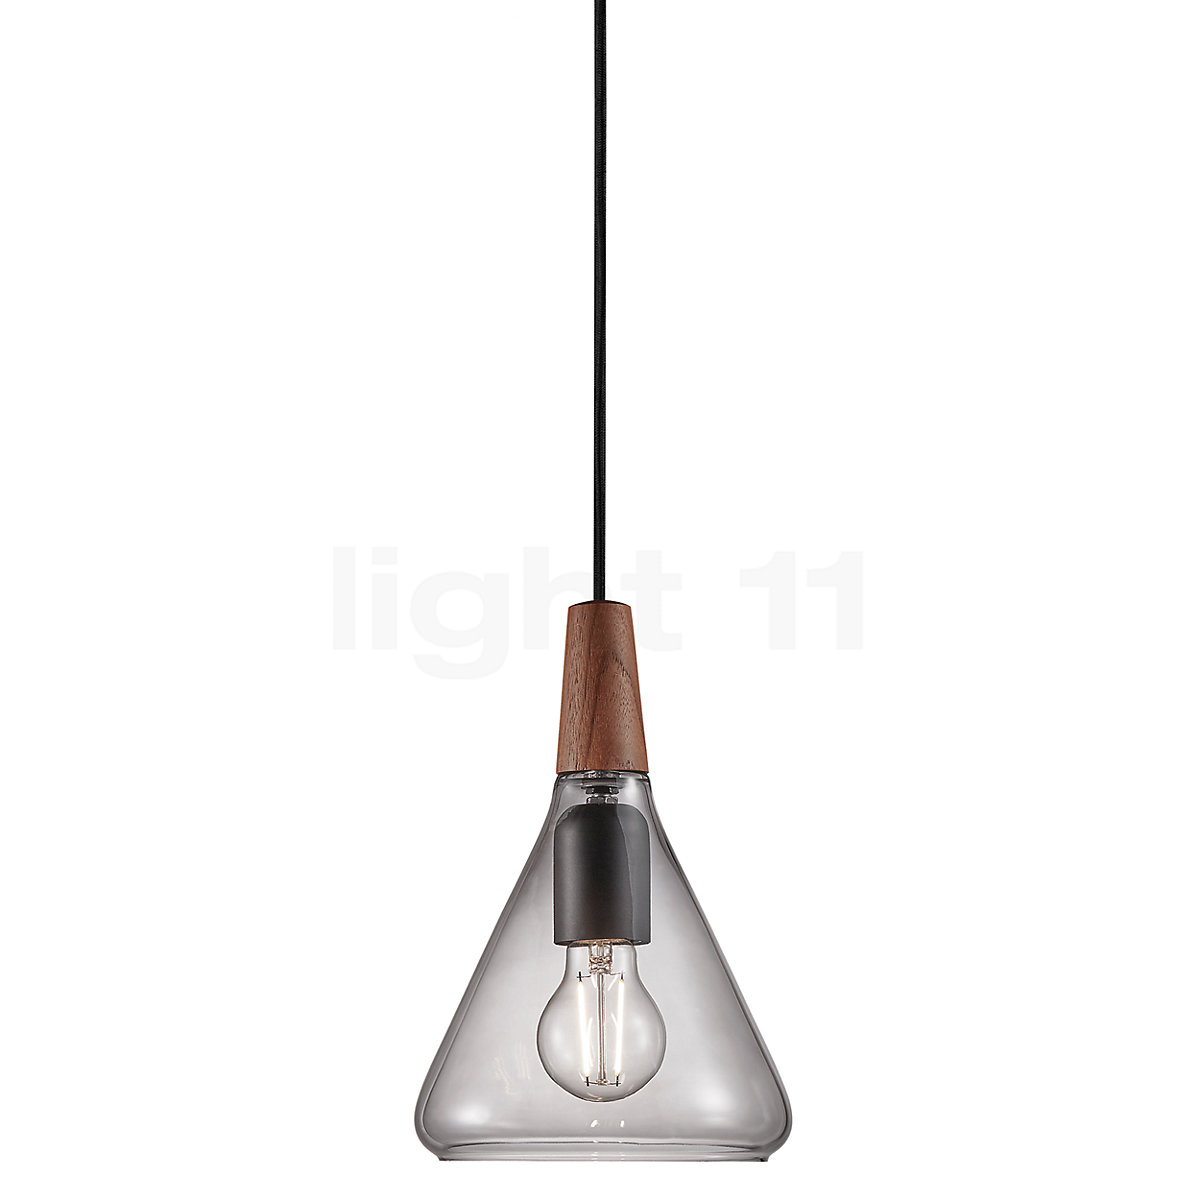 Buy Design for the People Nori Pendant Light at